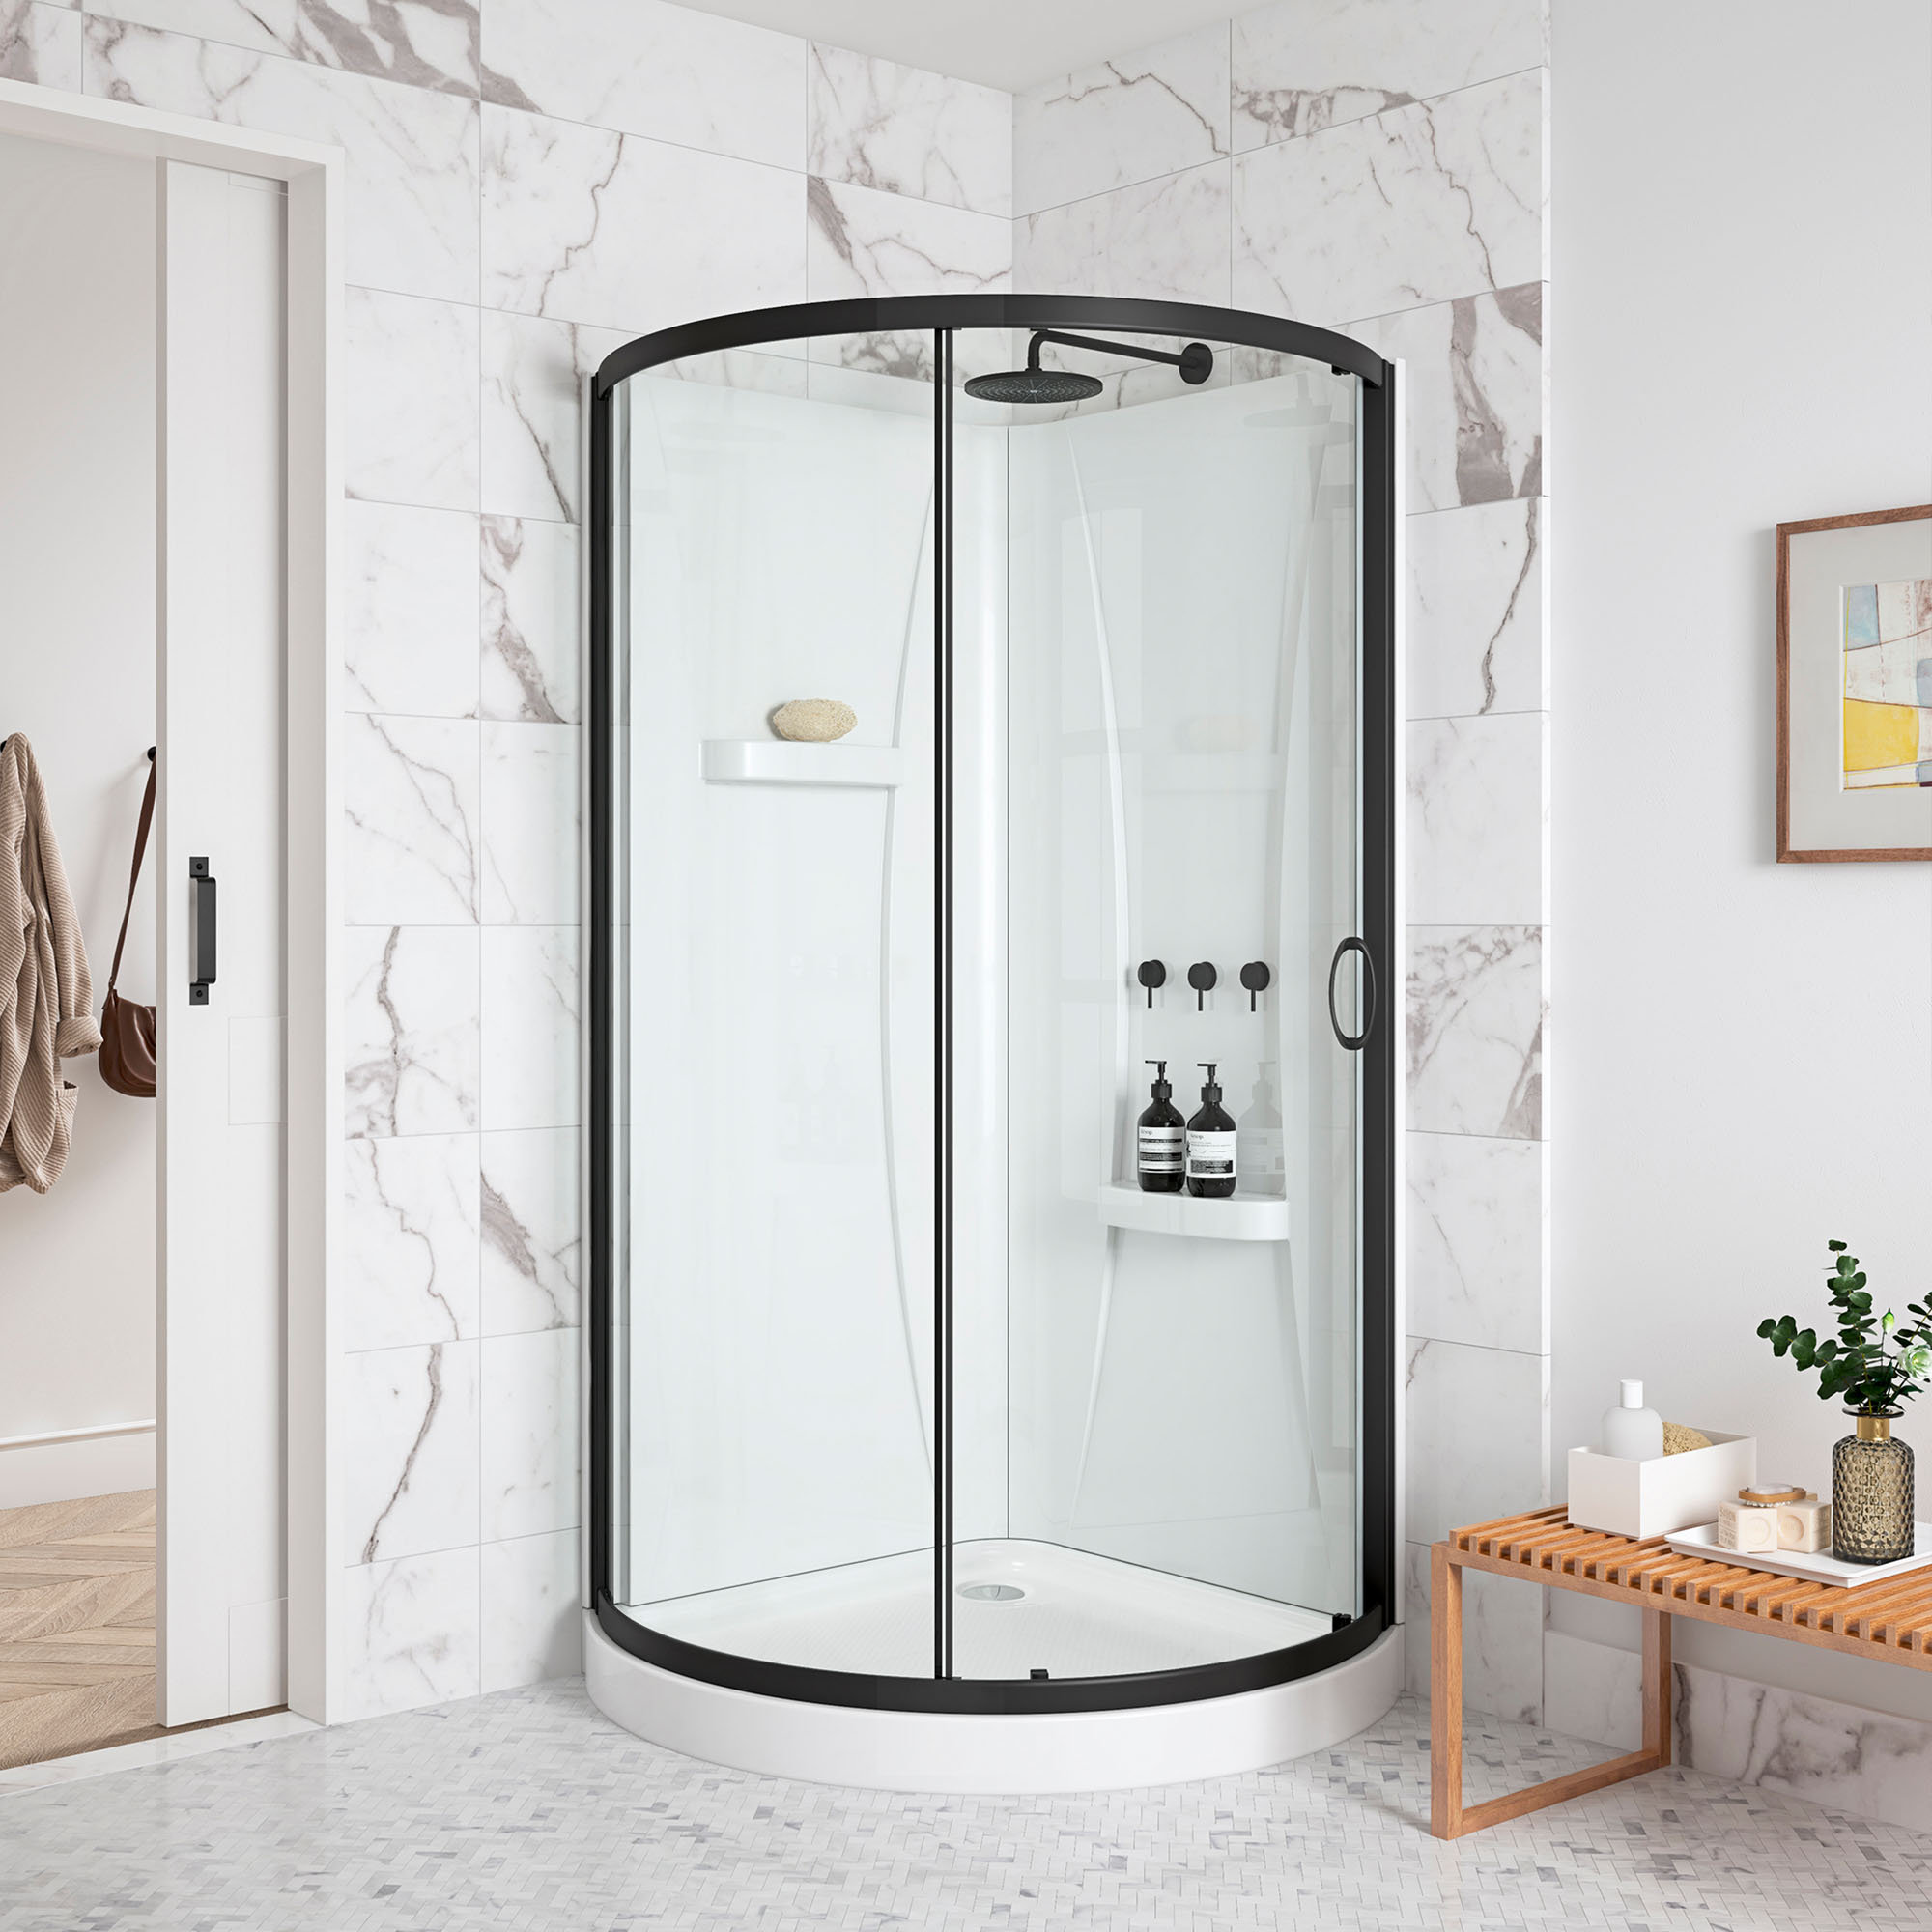 42 Things That'll Give You No Choice But To Stay Organized  Shower shampoo  holder, Glass shower shelves, Bathroom organisation